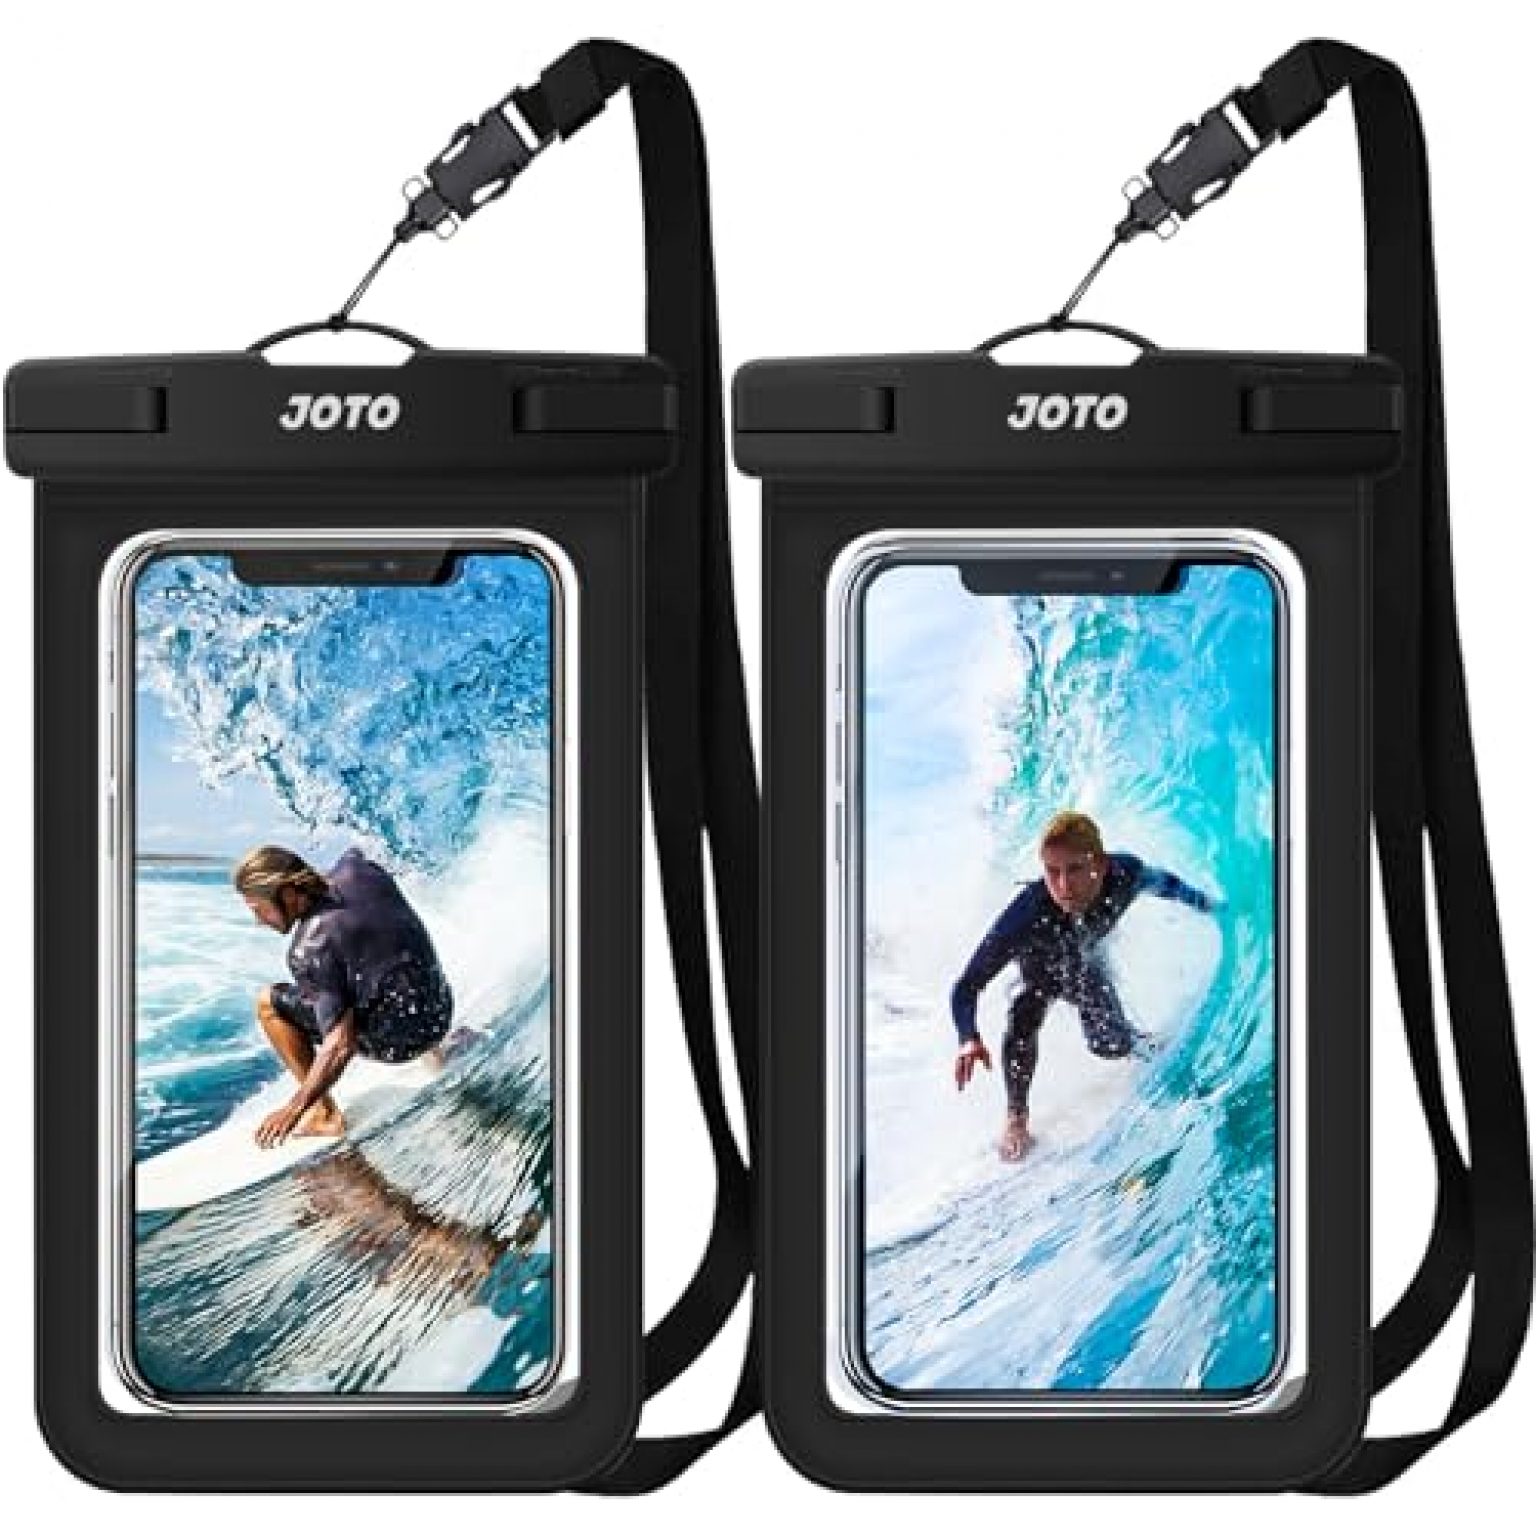 JOTO IPX8 Waterproof Phone Pouch, 2 Pack — Deals from SaveaLoonie!